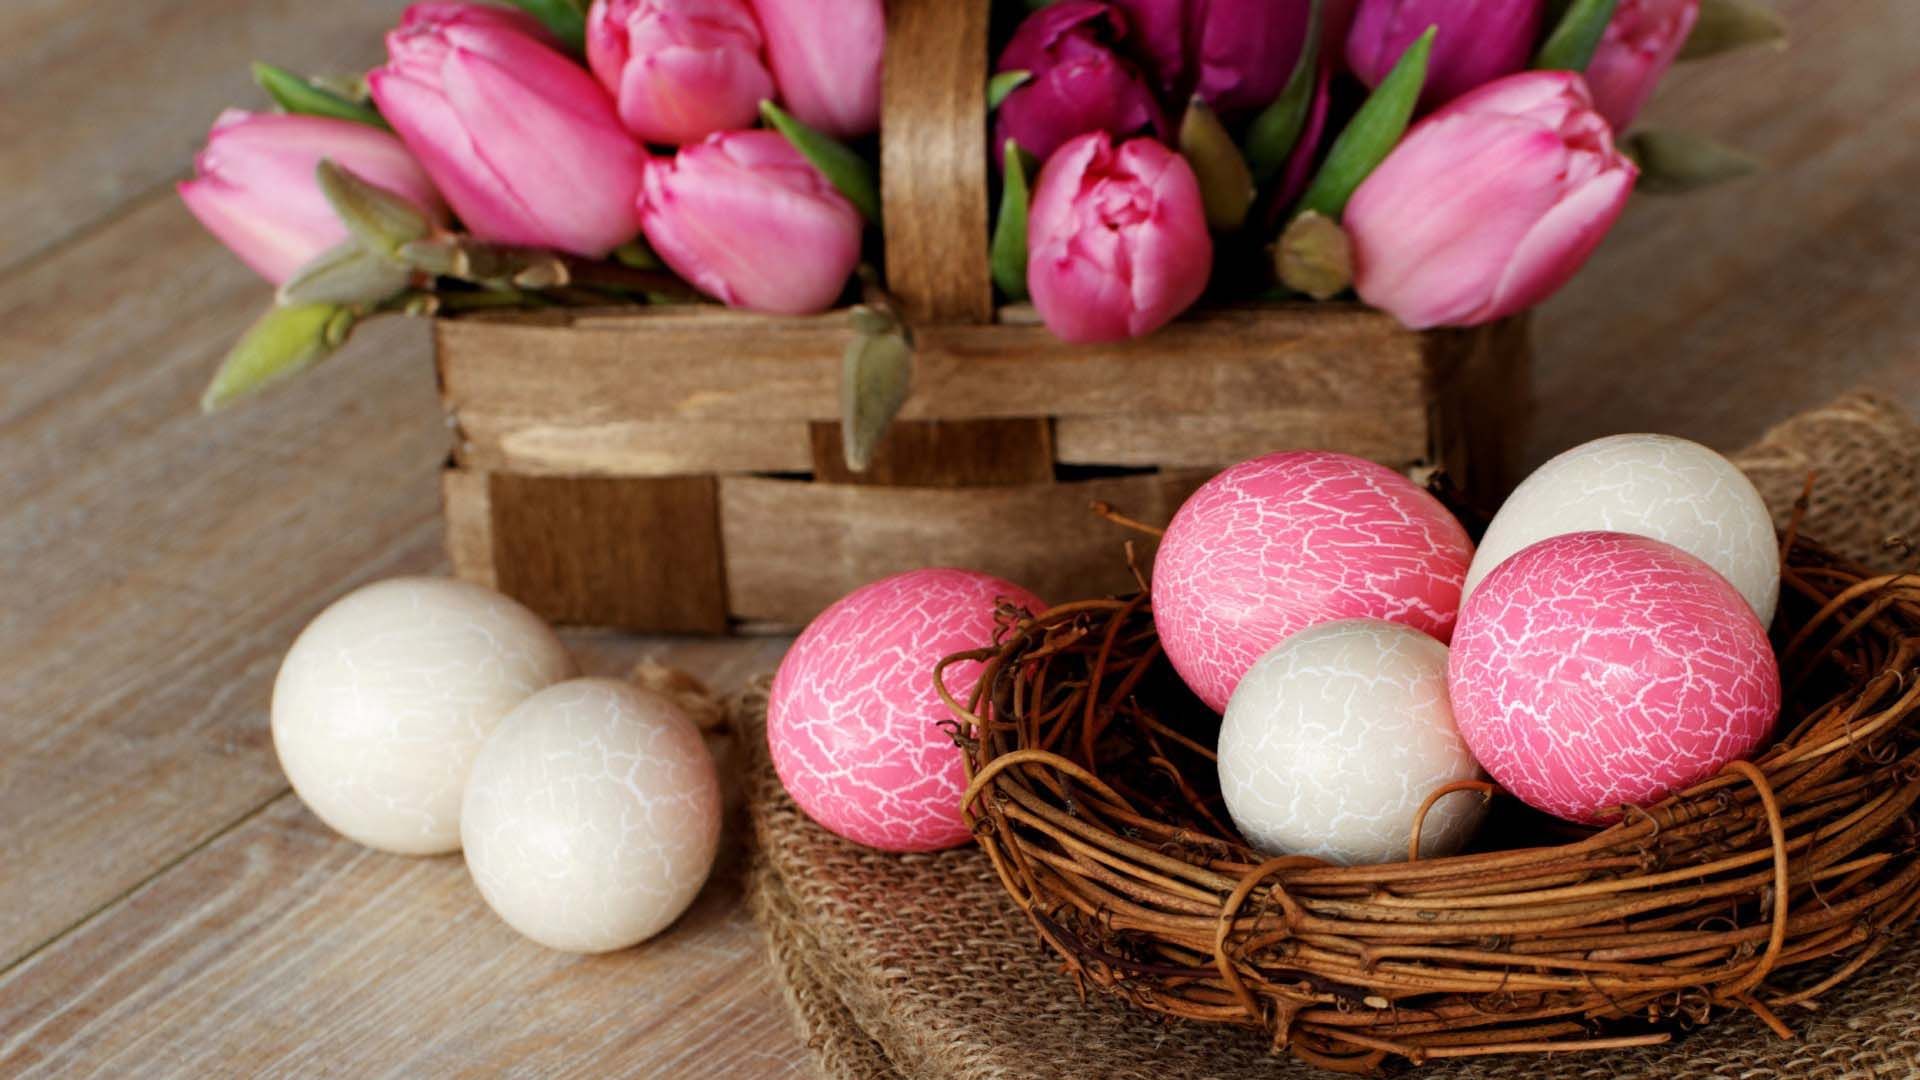 Hapy Easter White And Pink Eggs For Easter Wallpaper 1920x1080 PC Wallpaper. Easter eggs, Easter wallpaper, Happy easter